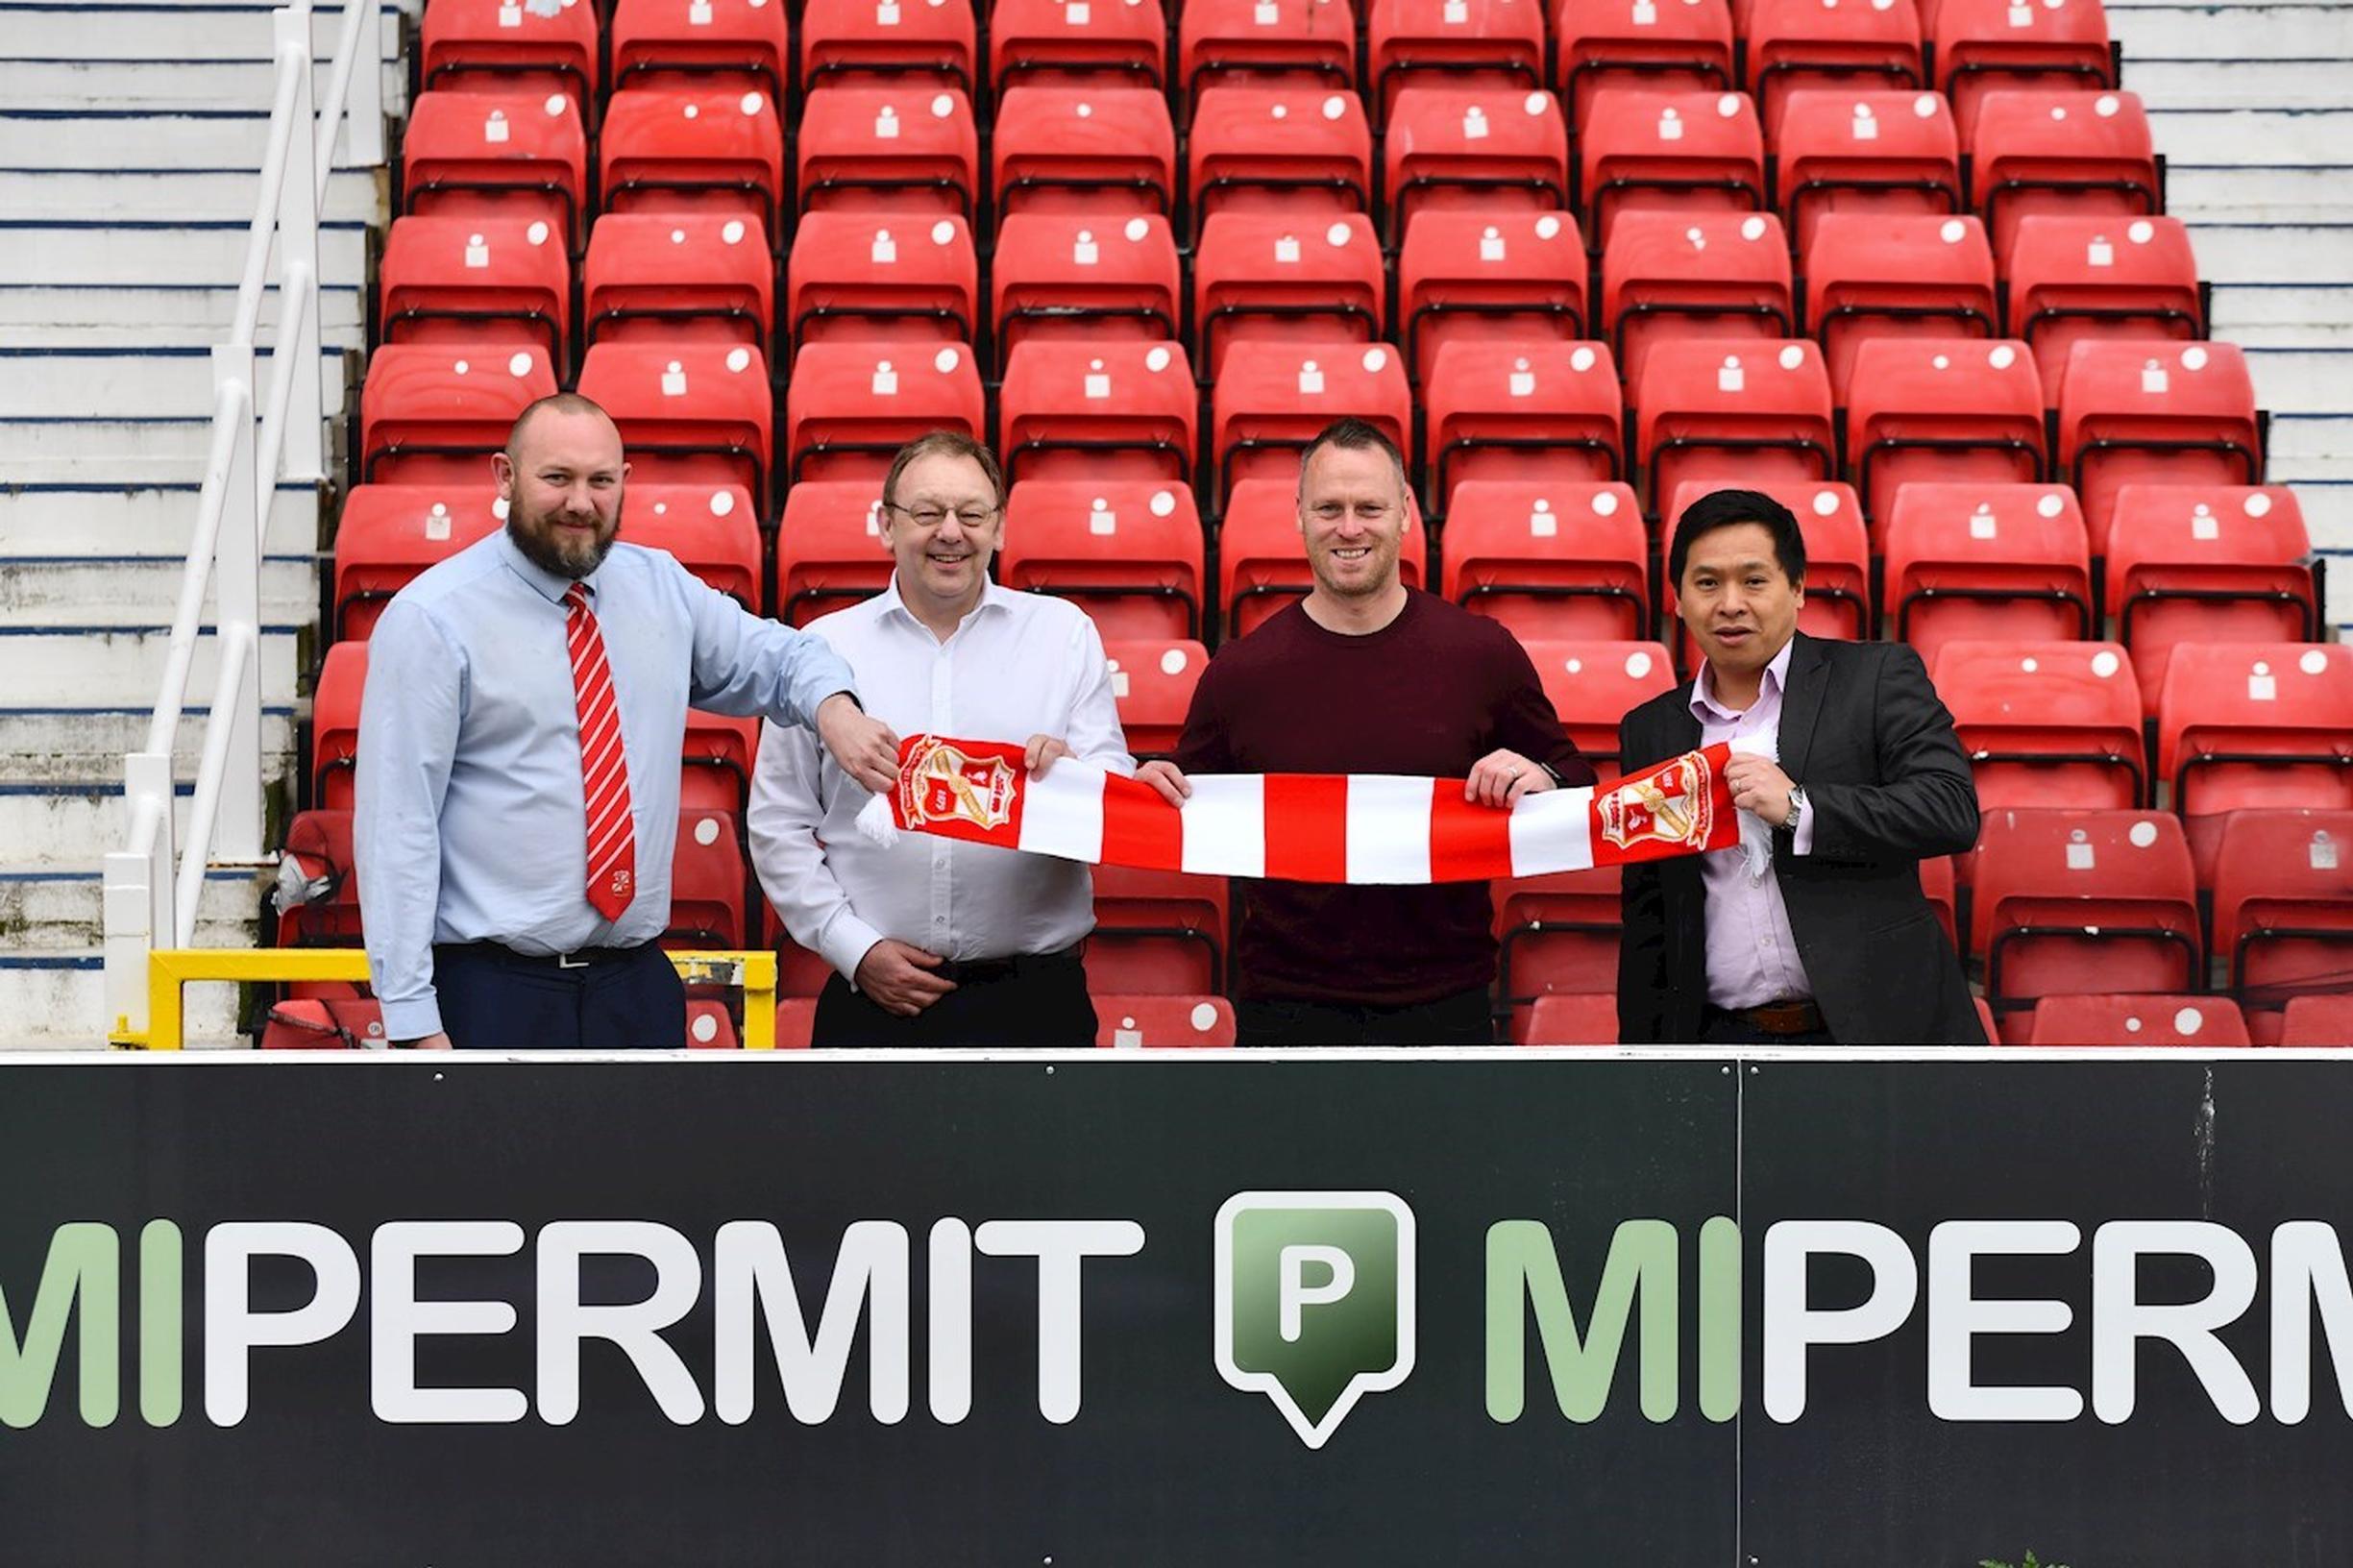 Swindon Town FC’s commercial manager James Watts and manager Michael Flynn flank Chipside’s Paul Moorby OBE and Simon Cheung